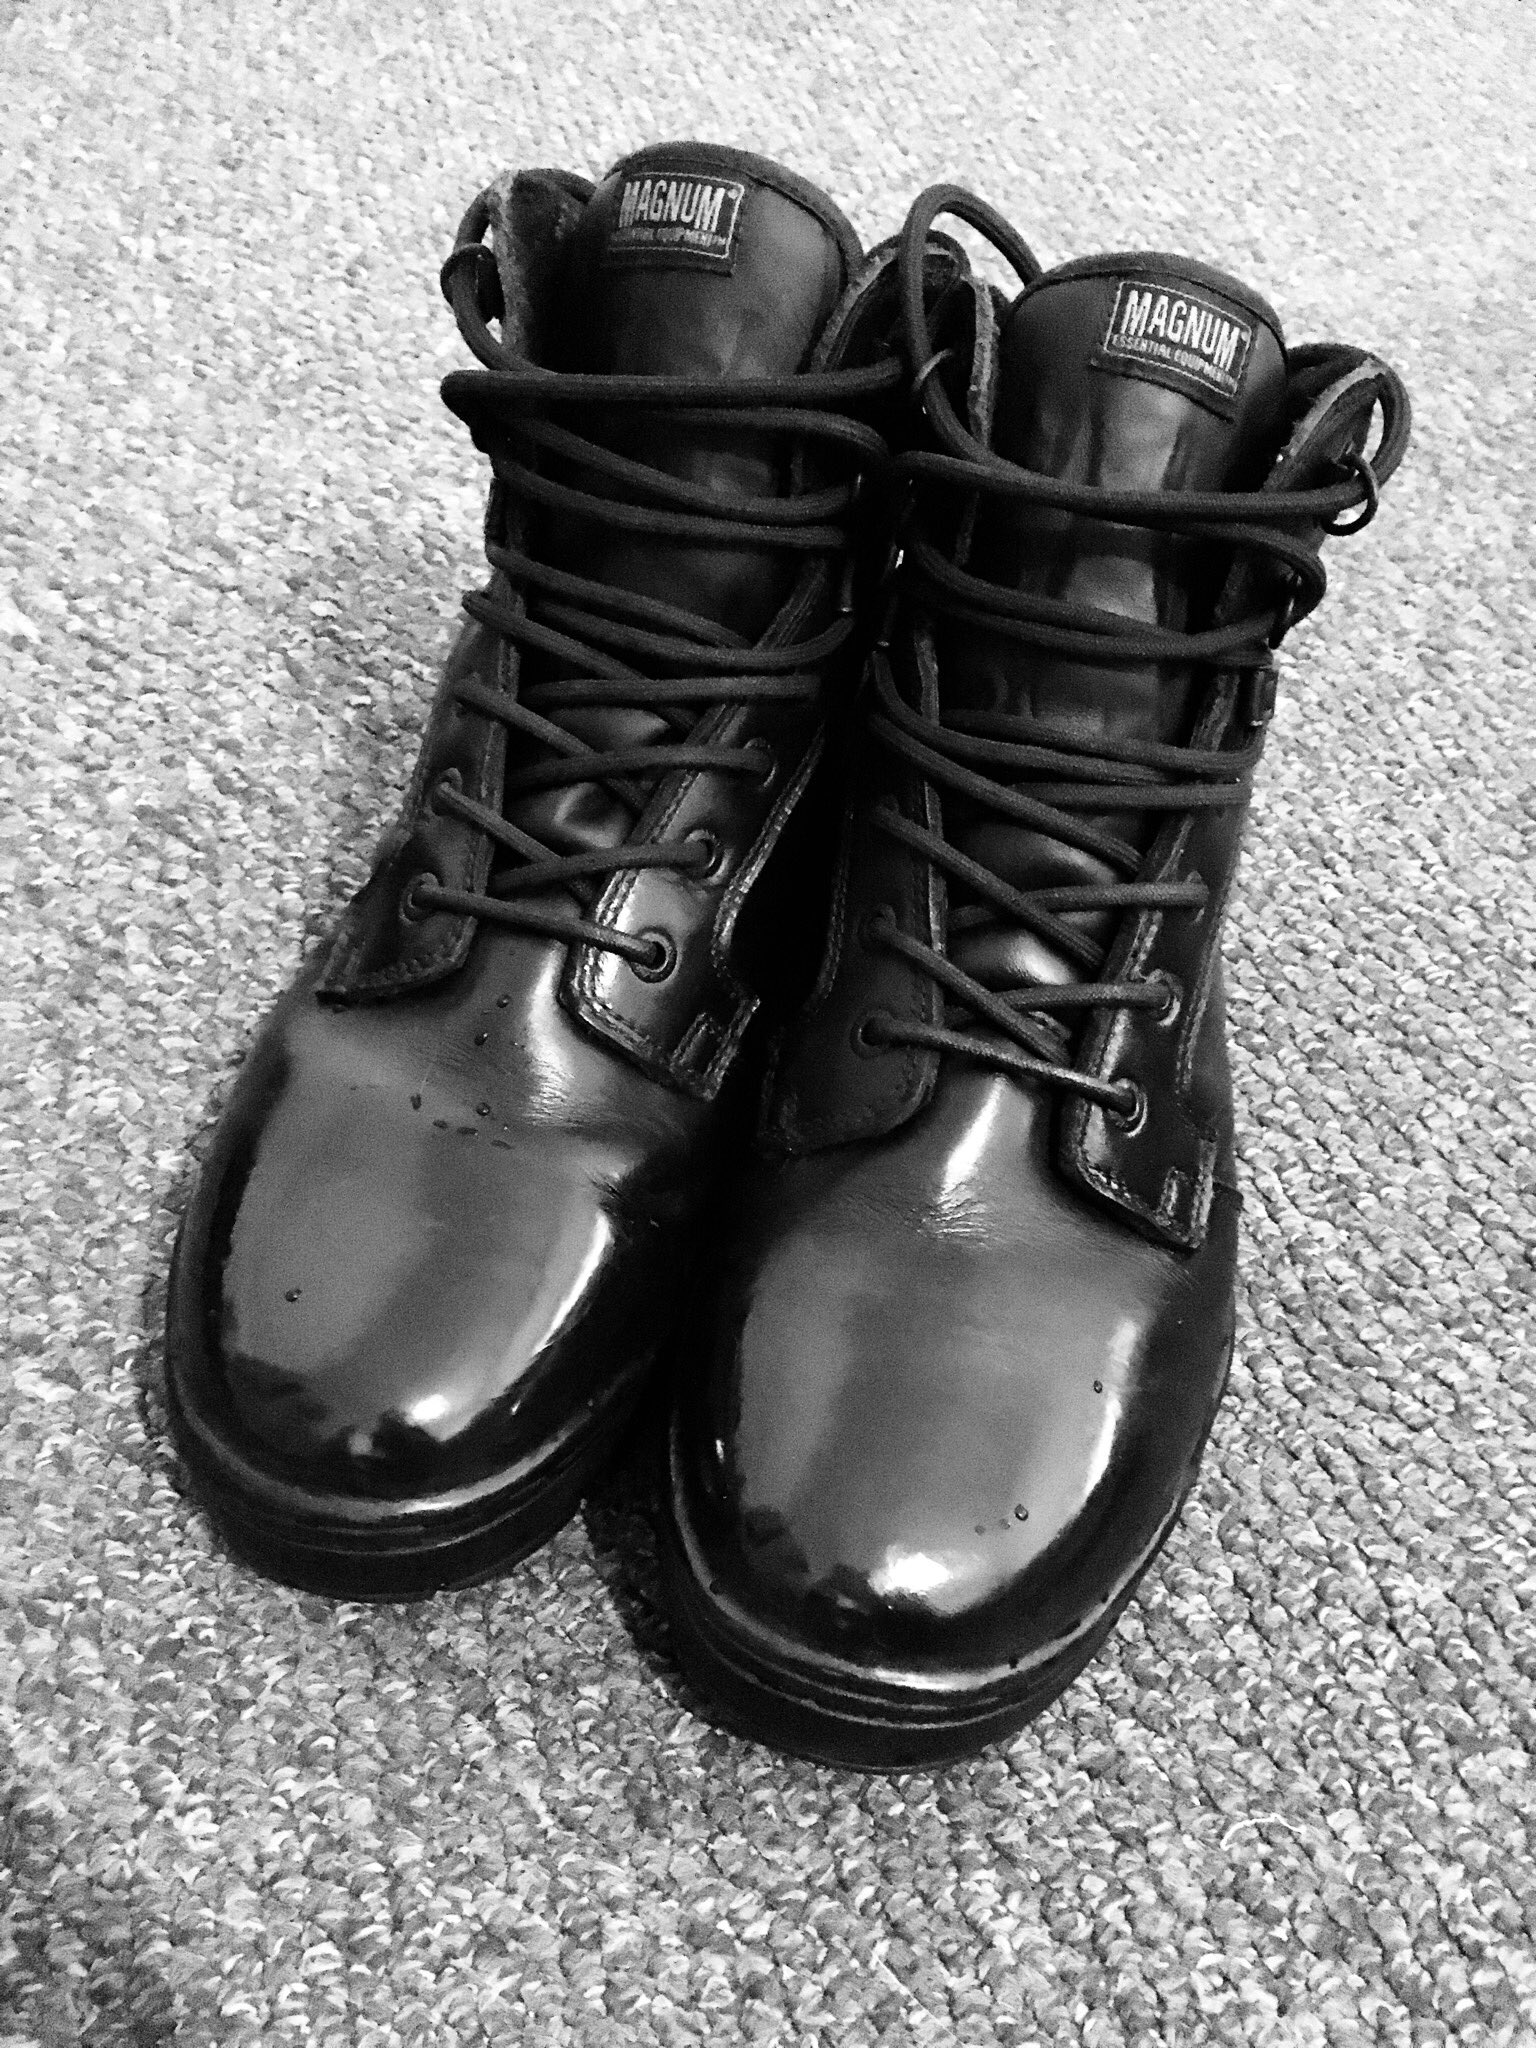 𝚆𝙳 𝙿𝚊𝚝𝚛𝚘𝚕 𝚃𝚎𝚊𝚖 𝟻 on X: "Boots polished ready for the morning #Shiny #Magnum #Boots #Cohort6 #BeSpecial #Police #WestYorkshirePolice @WYP_FTSSpecials https://t.co/xgun9jqKQj" / X